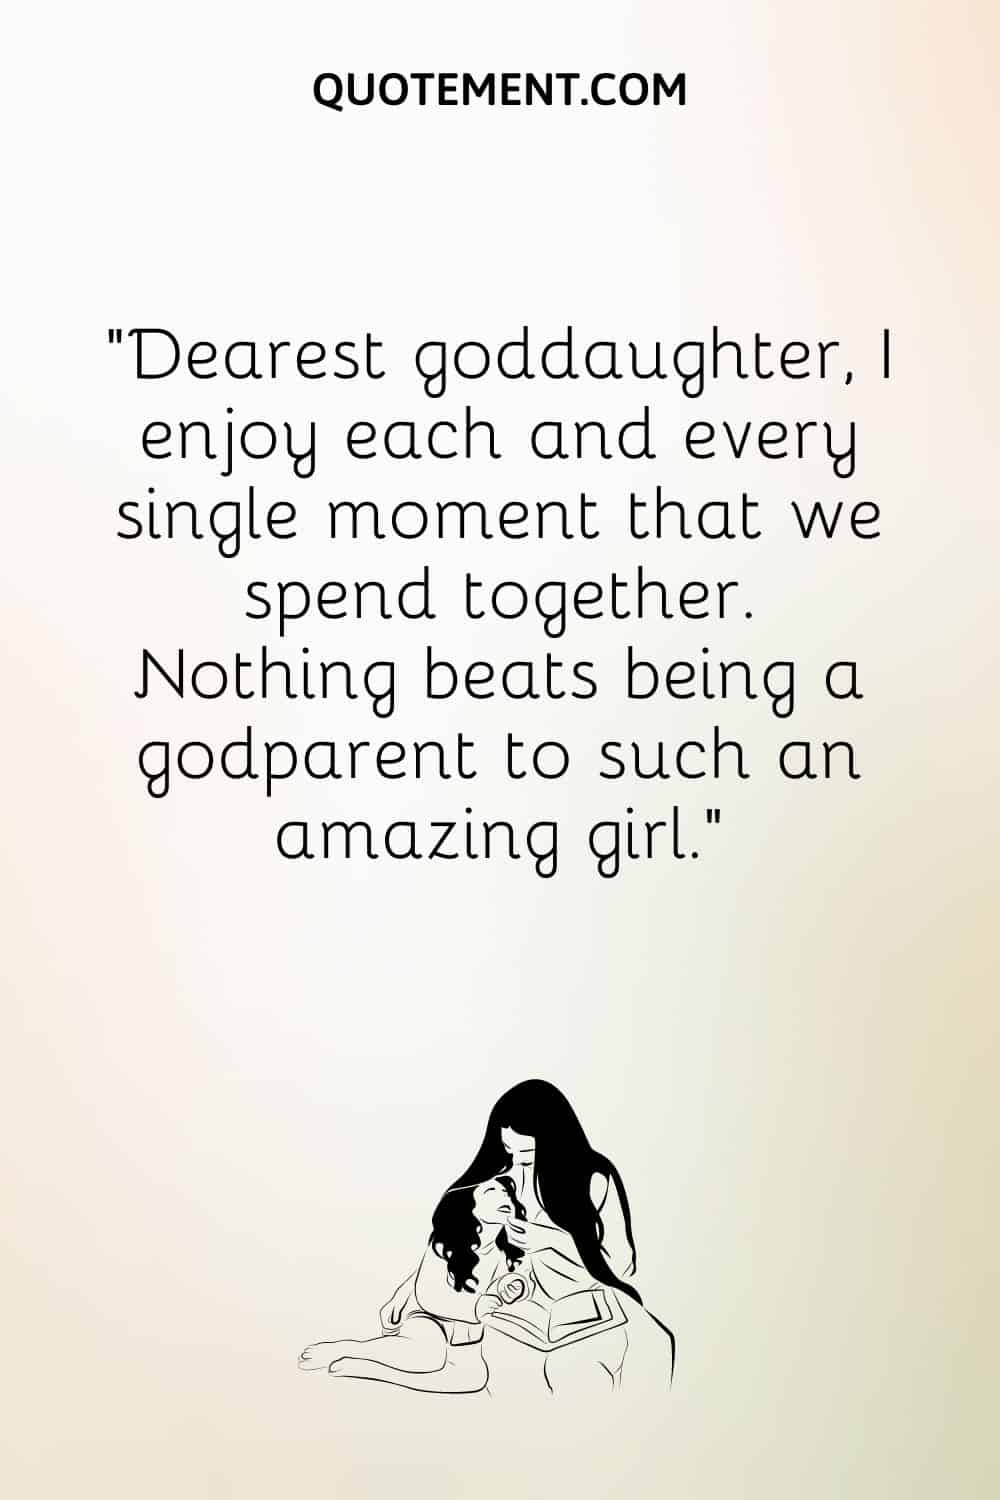 “Dearest goddaughter, I enjoy each and every single moment that we spend together. Nothing beats being a godparent to such an amazing girl.”